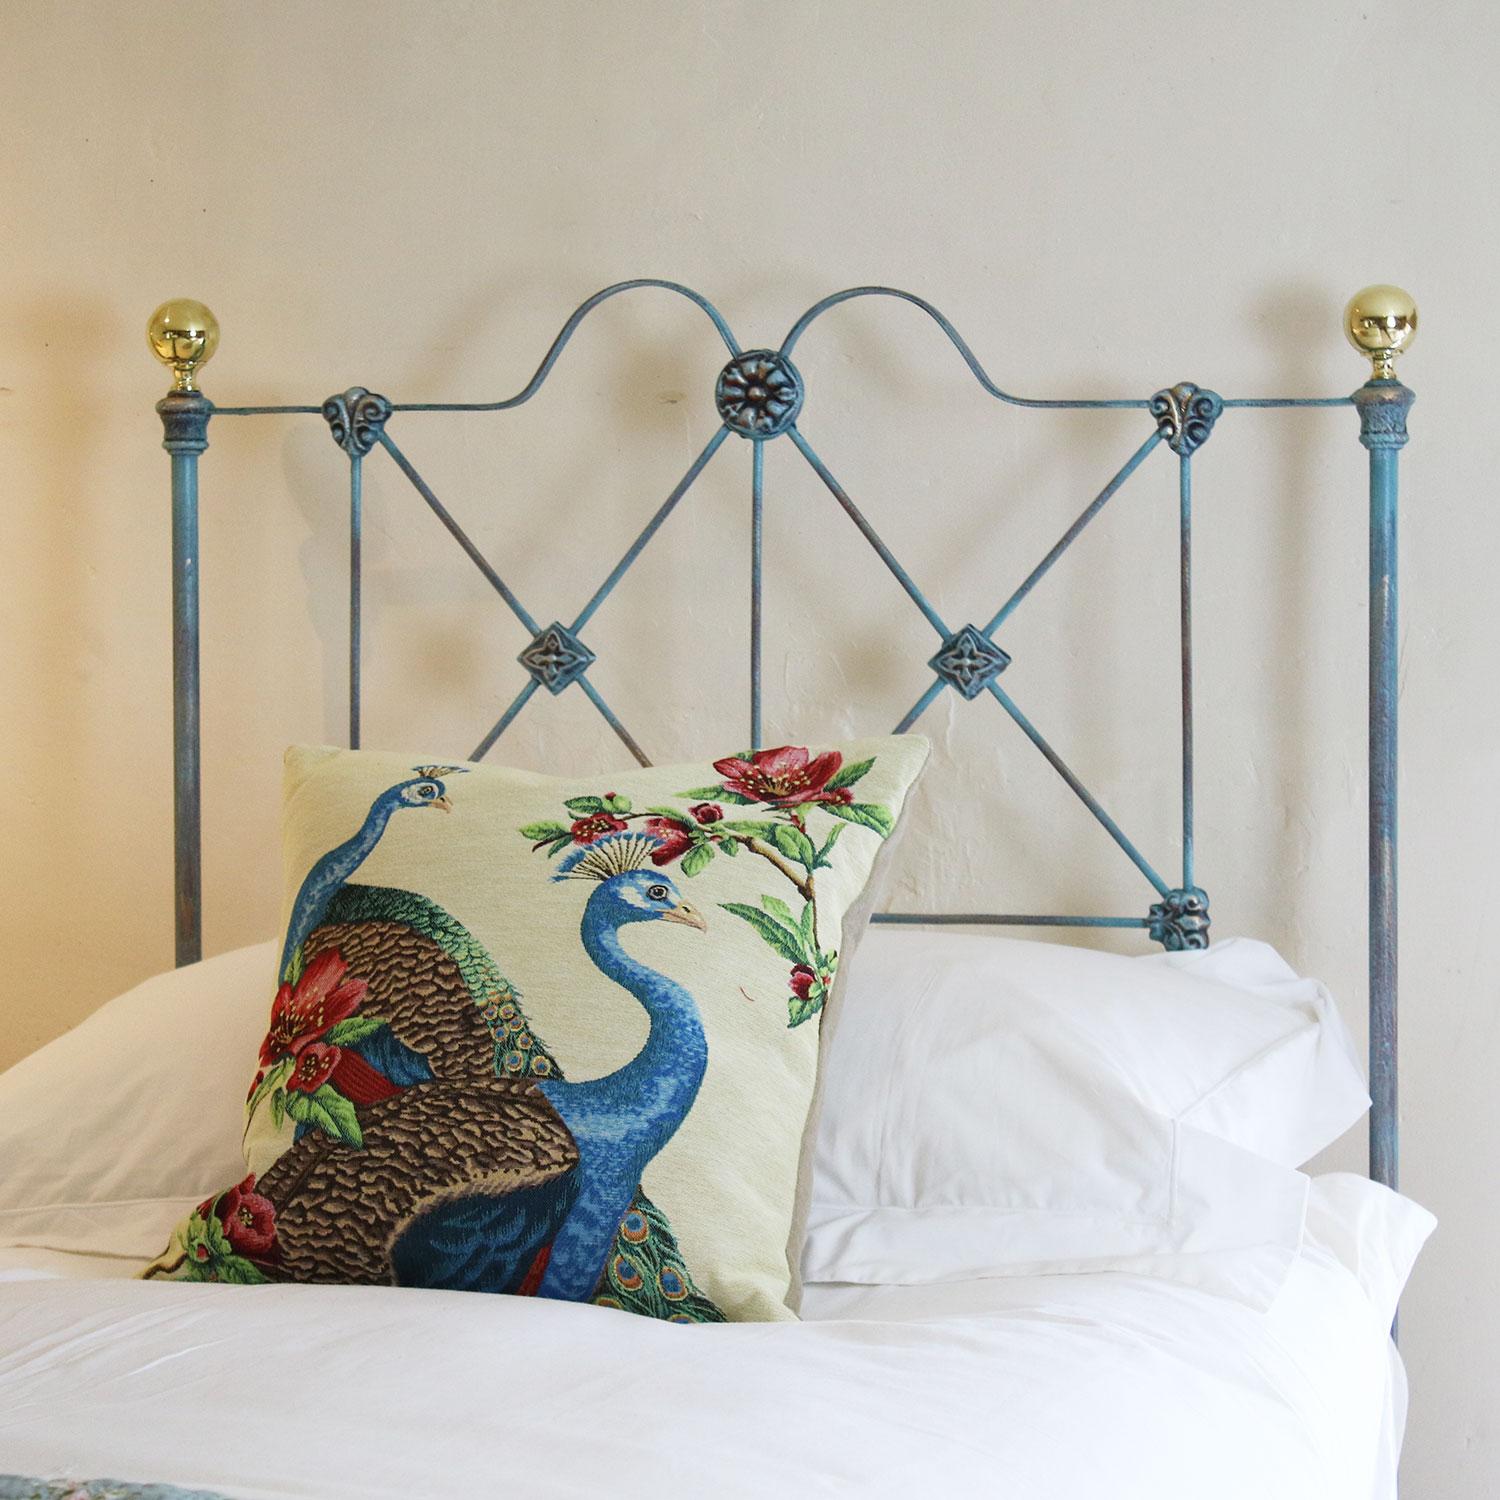 Matching pair of low end/platform bedsteads, finished in blue Verdigris - adapted from an original mid Victorian bedstead.

The price includes a pair standard single firm bed bases to support the mattresses. 

The mattresses, bedding and bed linen